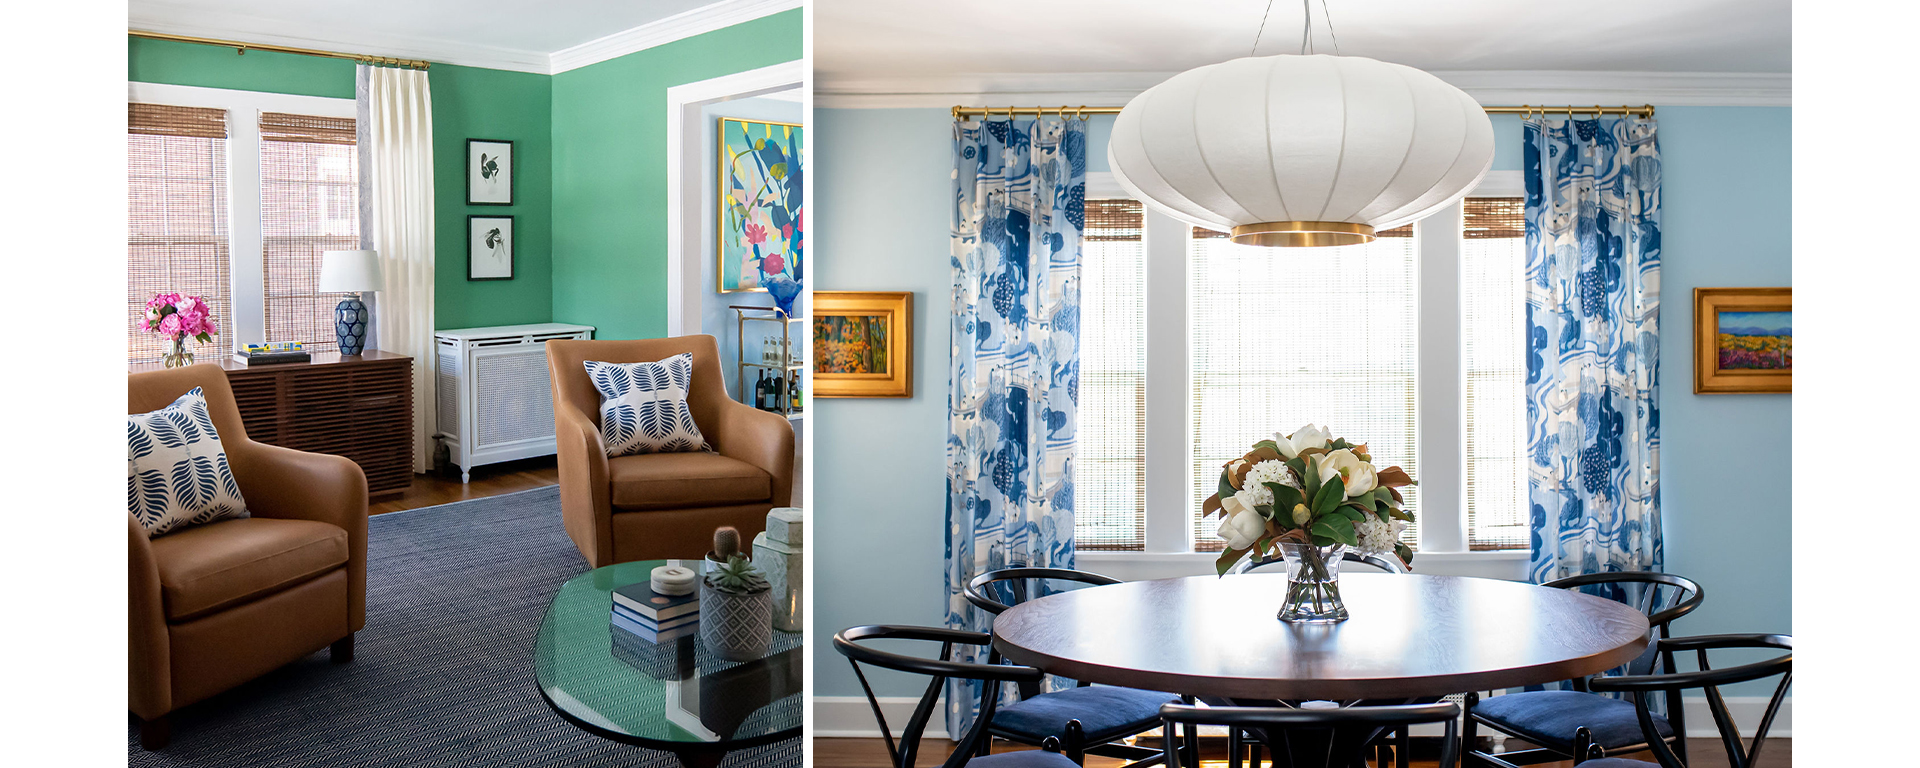 Left image: Glass coffee table with two tan leather armchairs with blue and white pillows in foreground with dark wood console table in front of window and jewel green painted walls,Right image: Round dining table with six wishbone dining chairs, bouquet centerpiece, in front of large window with blue and white curtains and light blue walls.